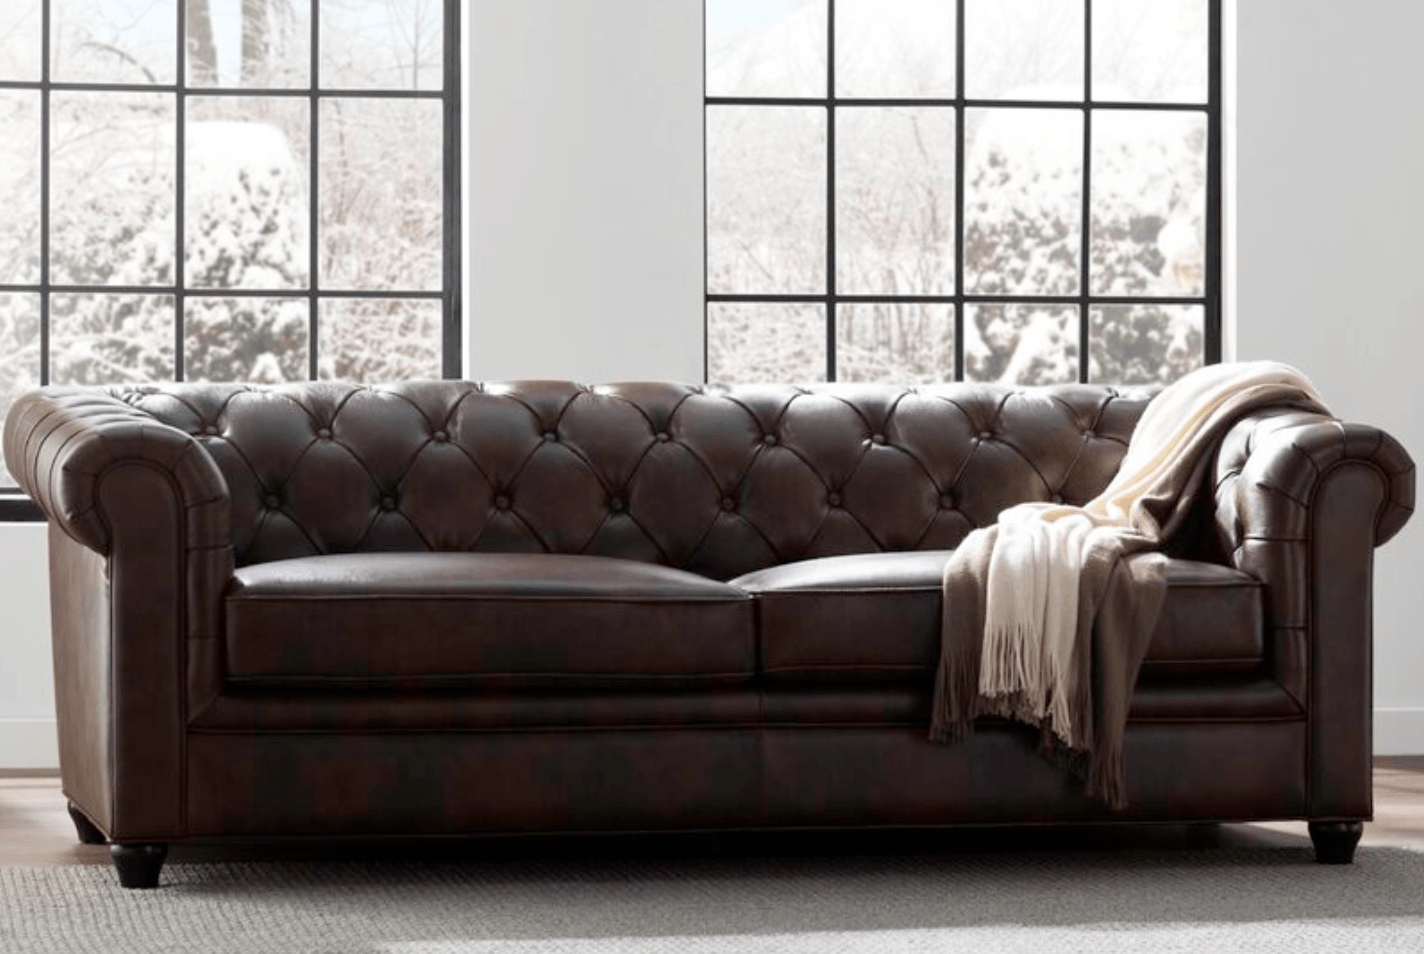 harlem leather chesterfield sofa